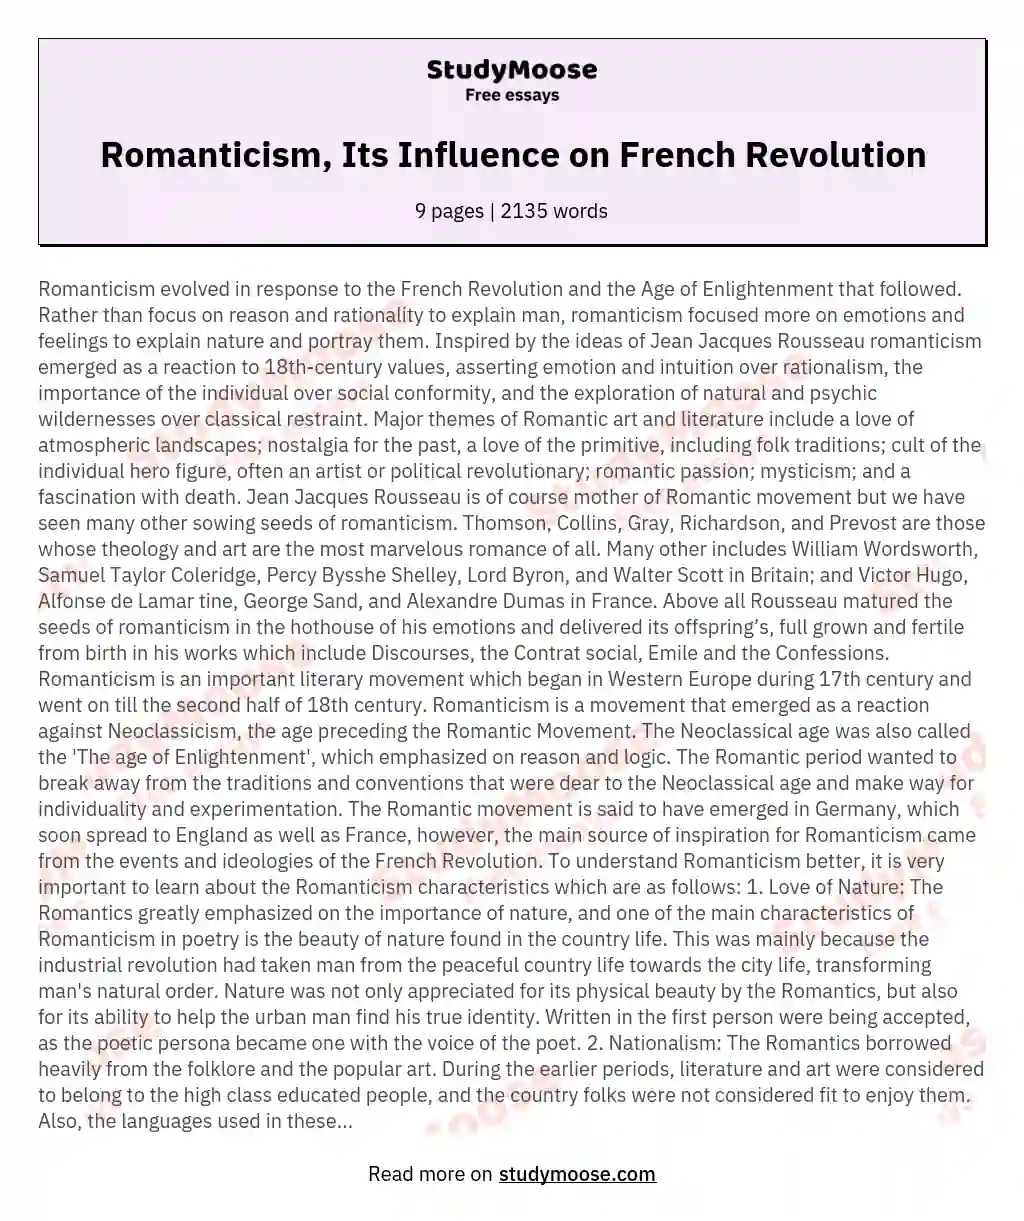 Romanticism, Its Influence on French Revolution essay